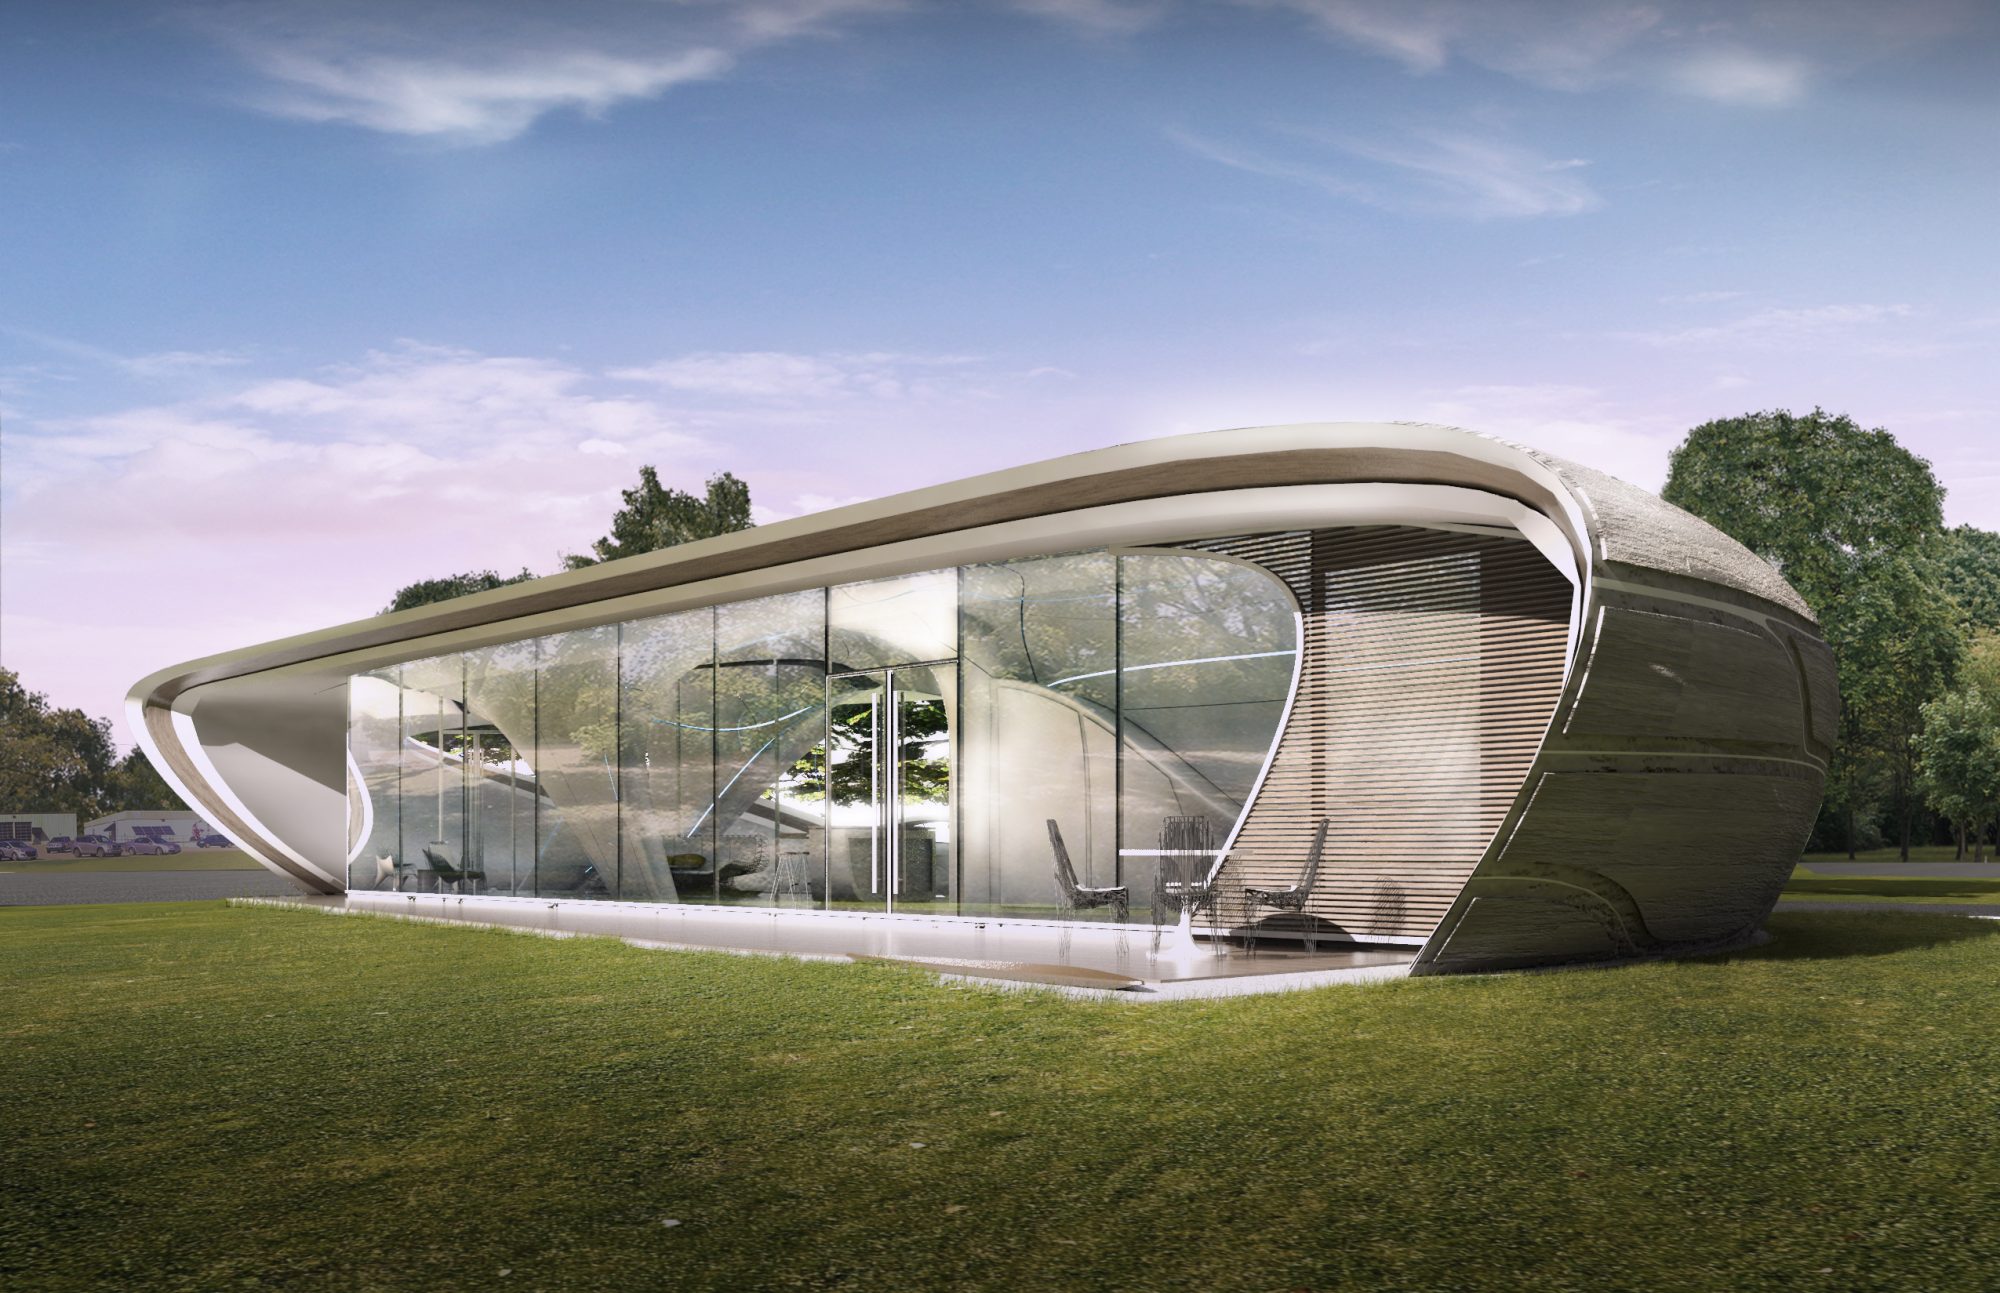 Reinventing the home Designing the world’s first freeform 3D printed